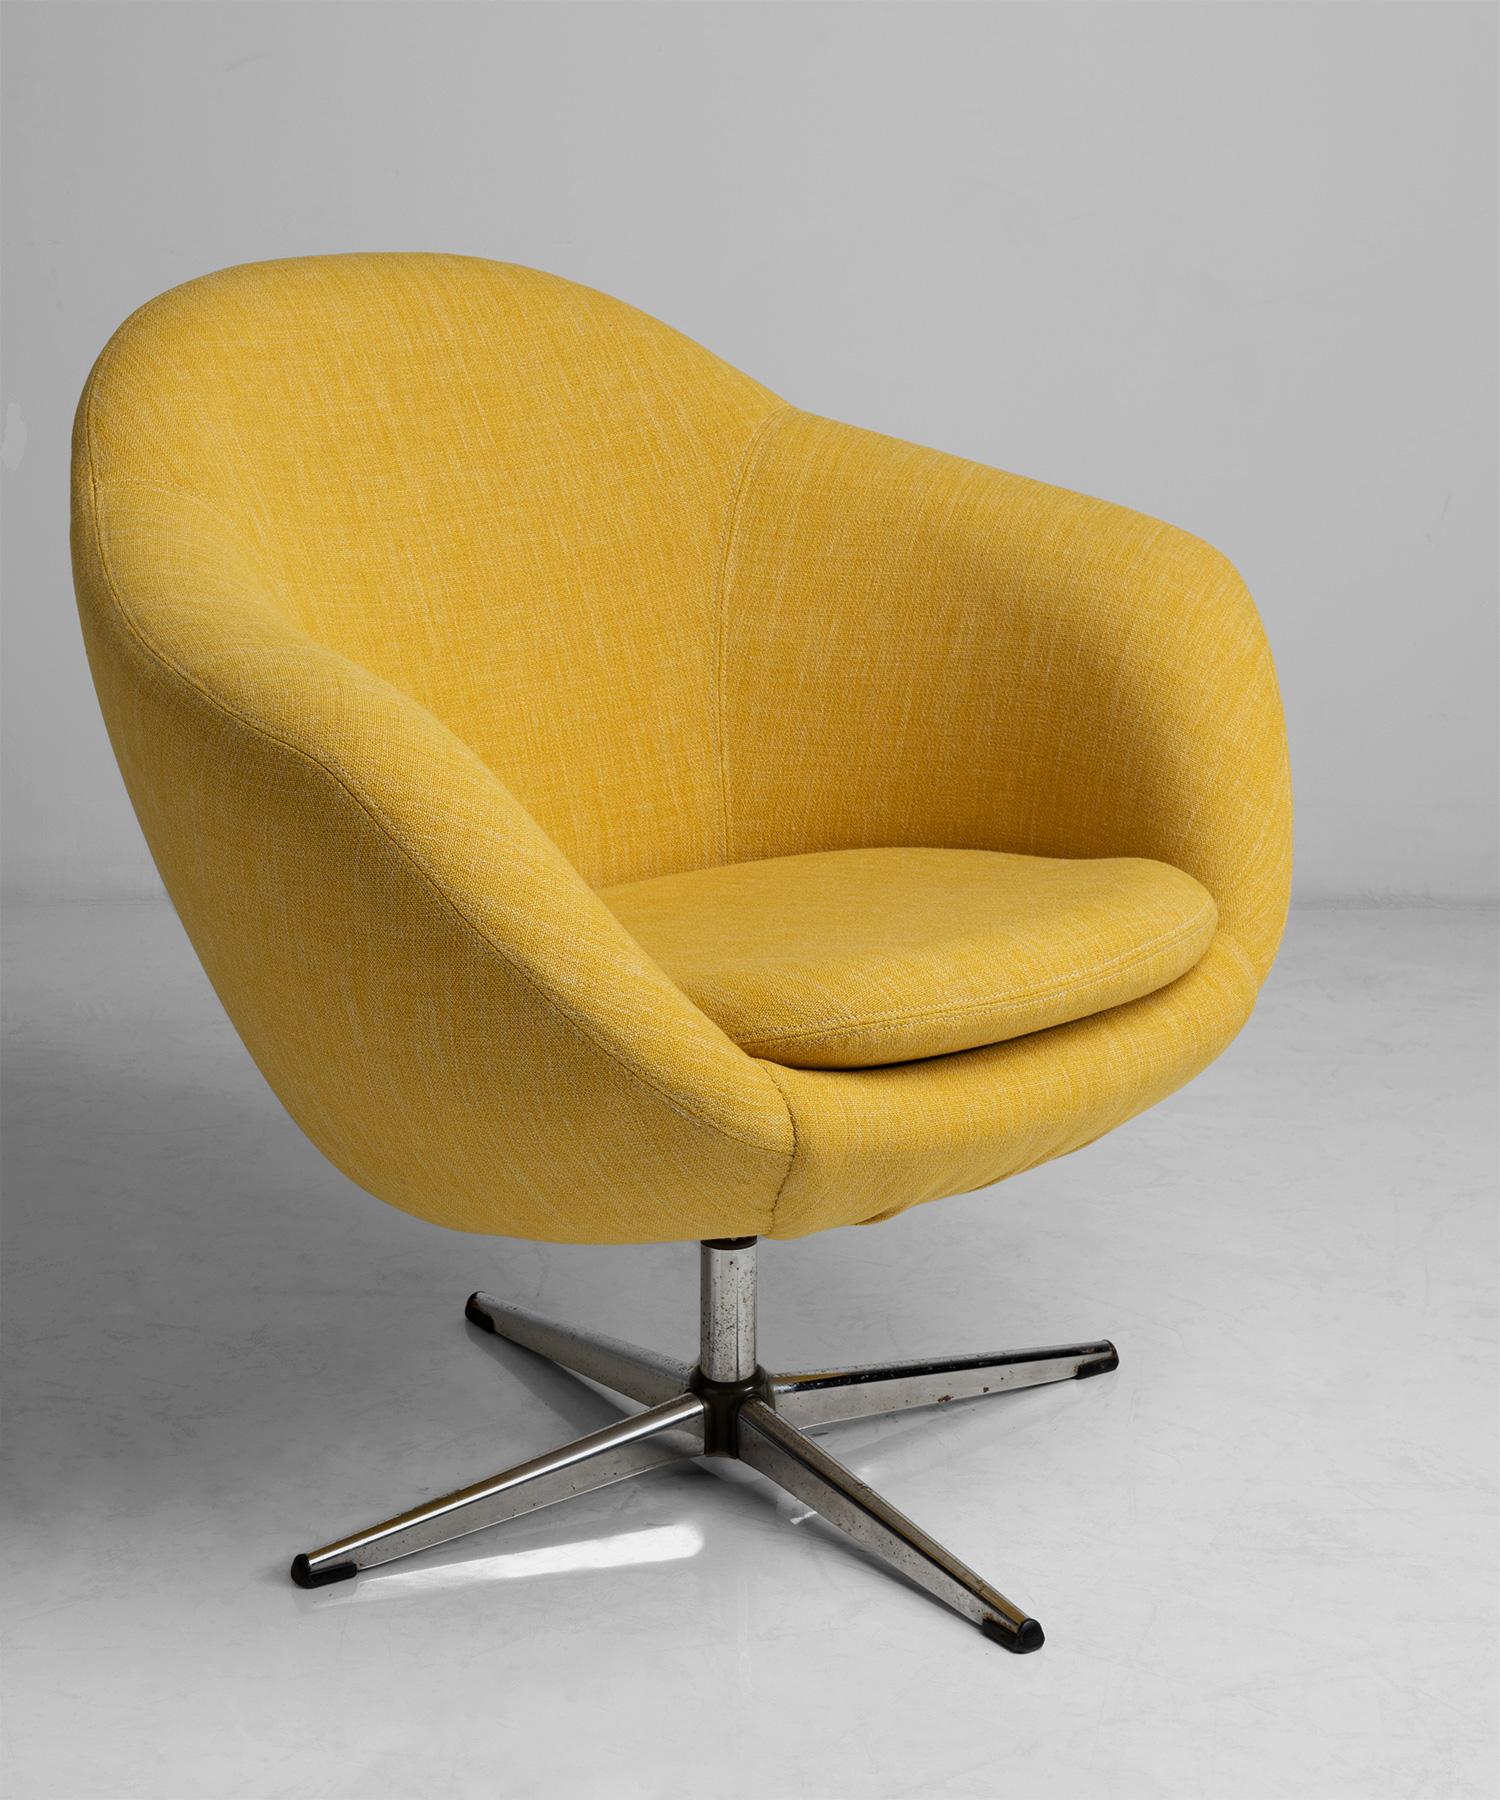 American Pair of Overman Swivel Chairs in Wool Blend by Maharam, America circa 1960